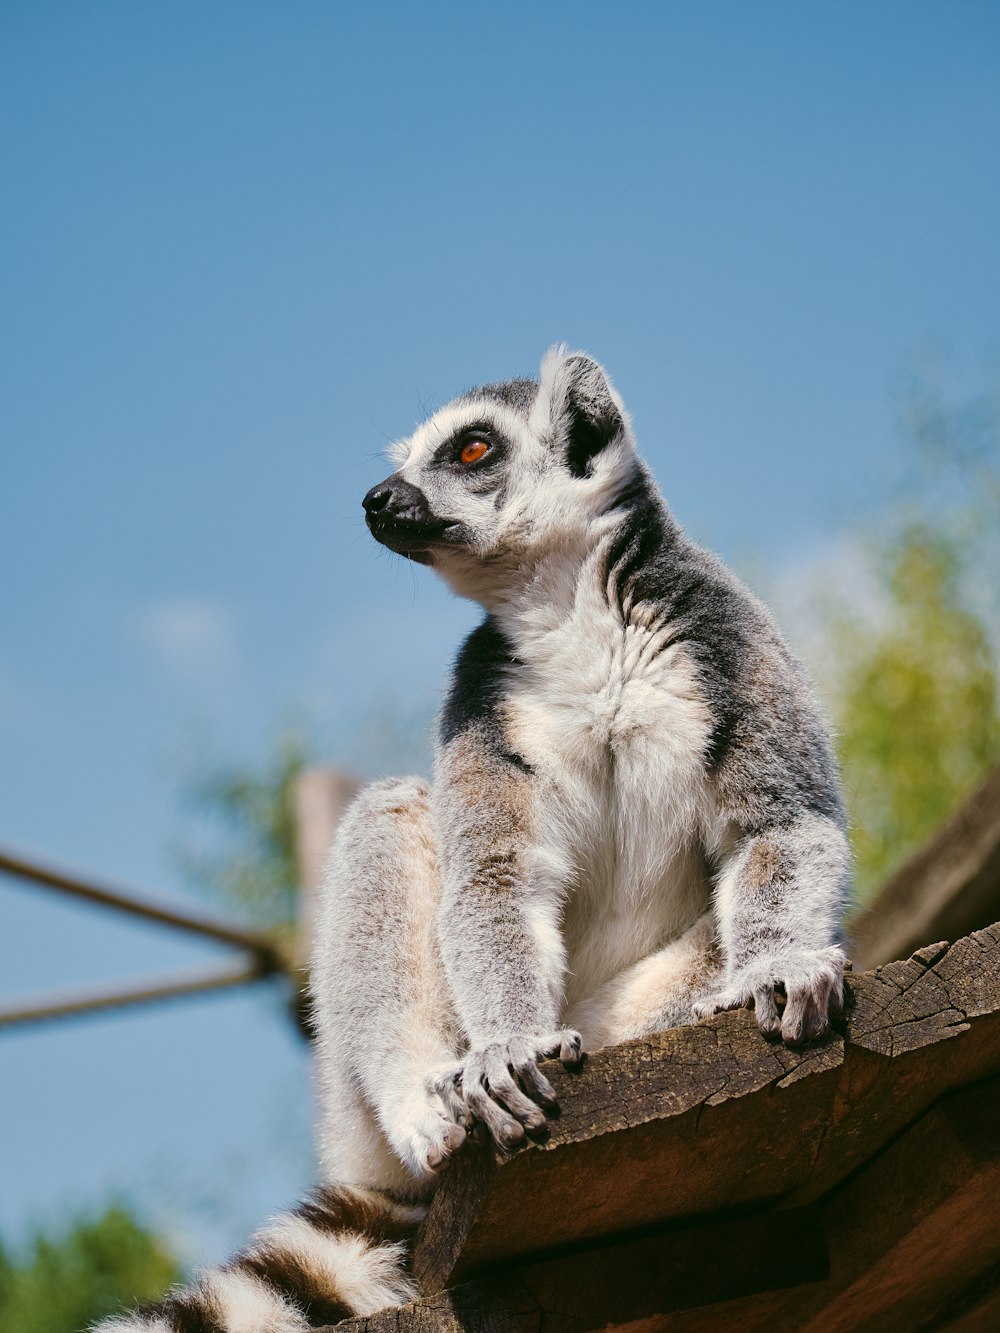 a small animal sitting on top of a wooden structure